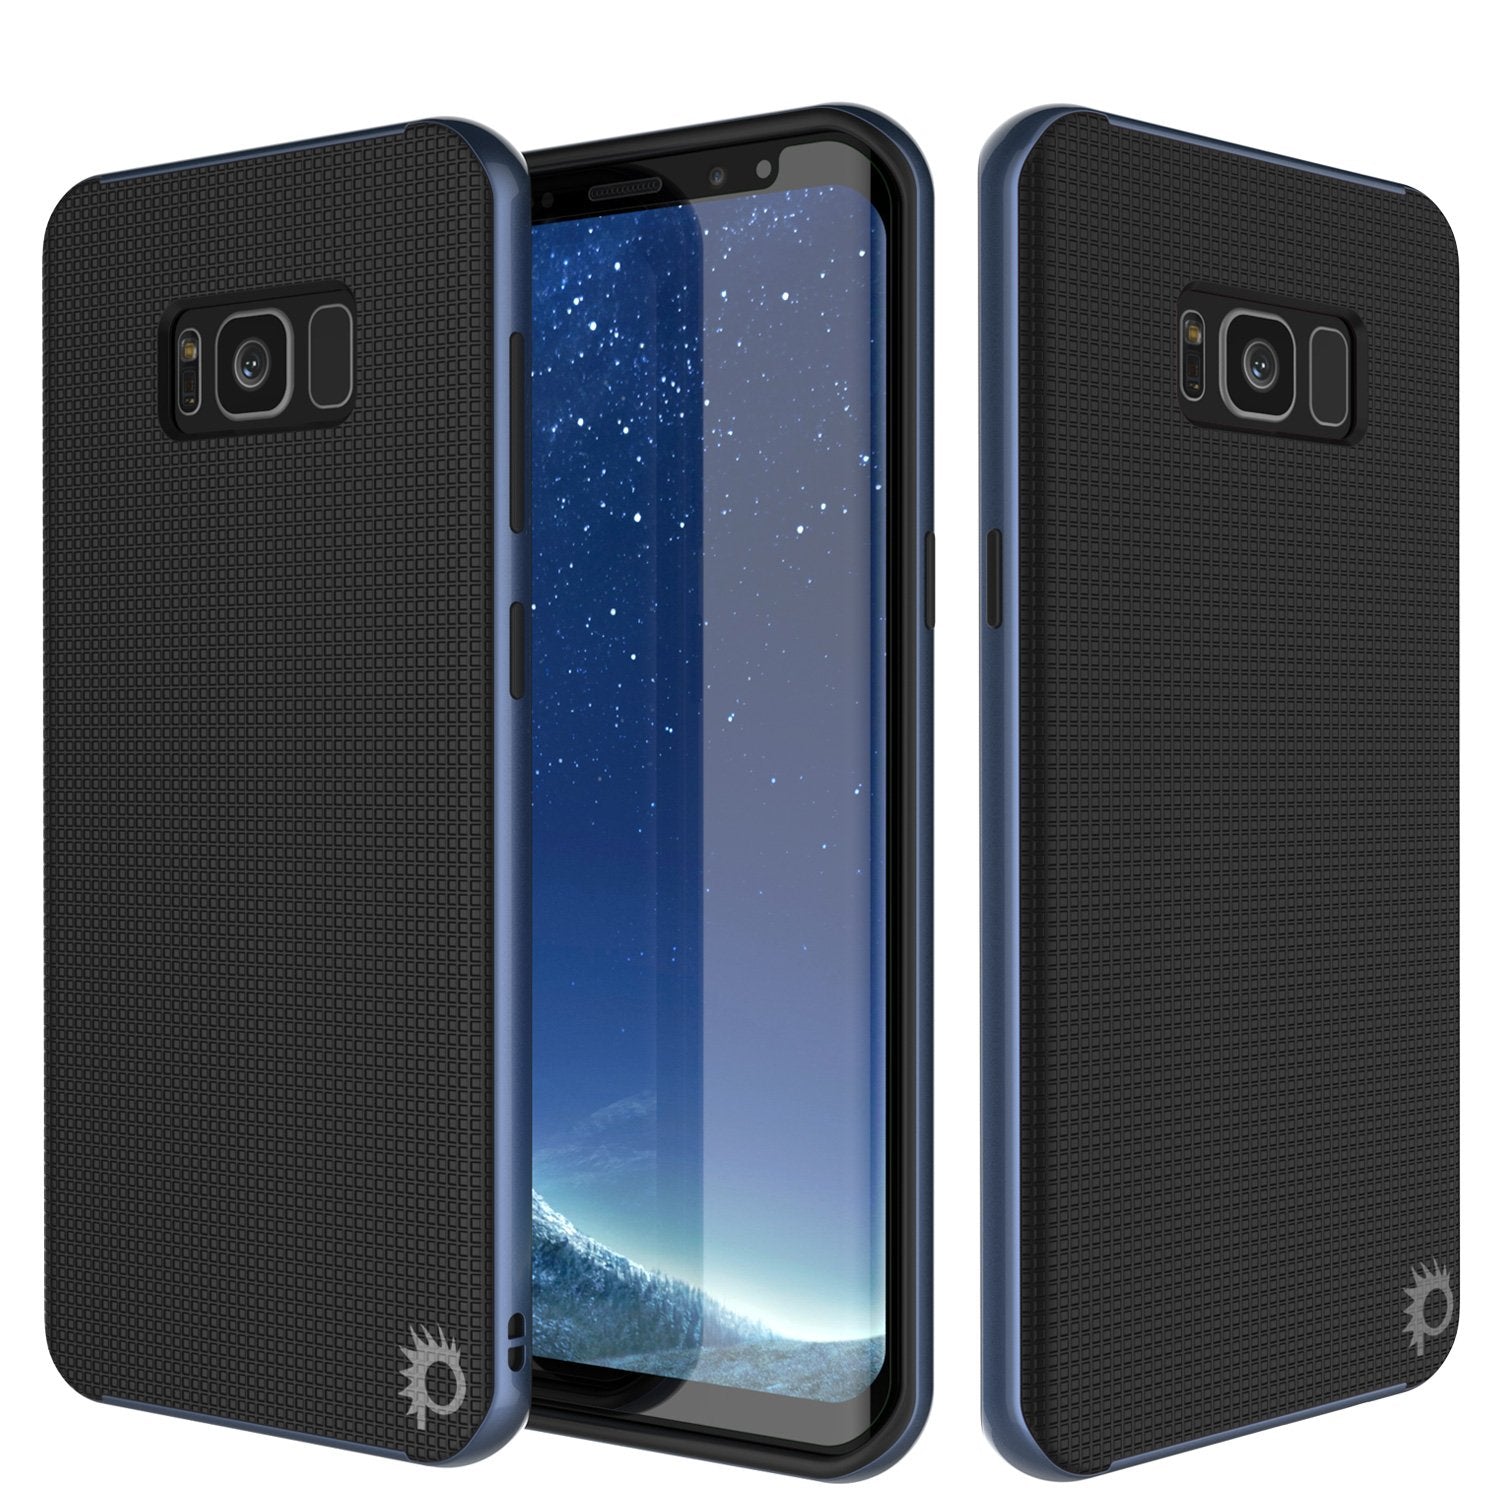 Galaxy S8 PLUS Case, PunkCase [Stealth Series] Hybrid 3-Piece Shockproof Dual Layer Cover [Non-Slip] [Soft TPU + PC Bumper] with PUNKSHIELD Screen Protector for Samsung S8+ [Navy Blue]